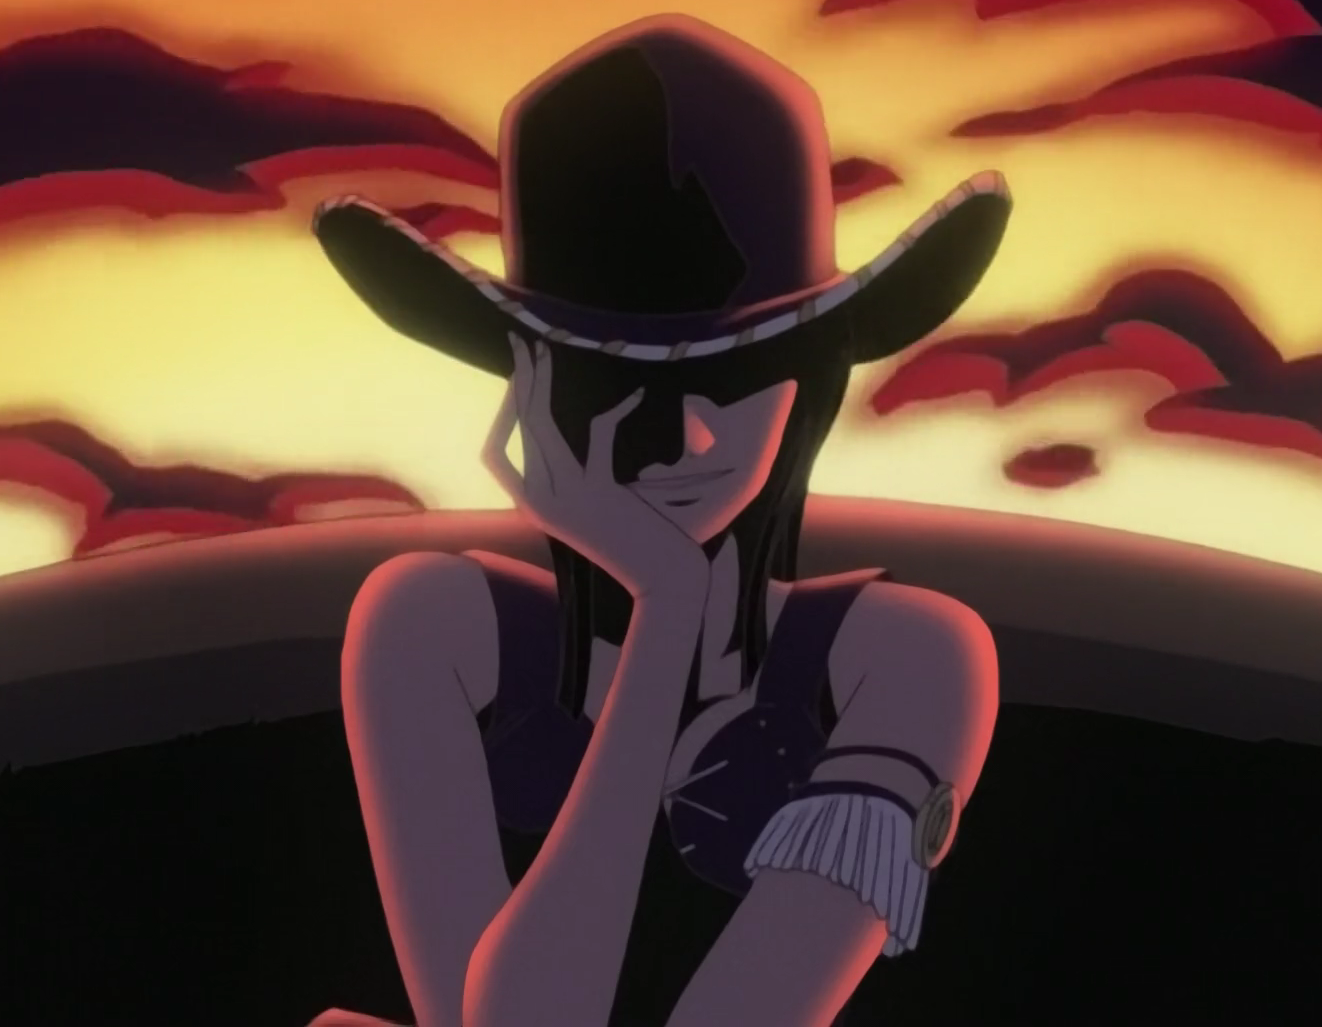 One Piece the mysterious Miss All Sunday appears